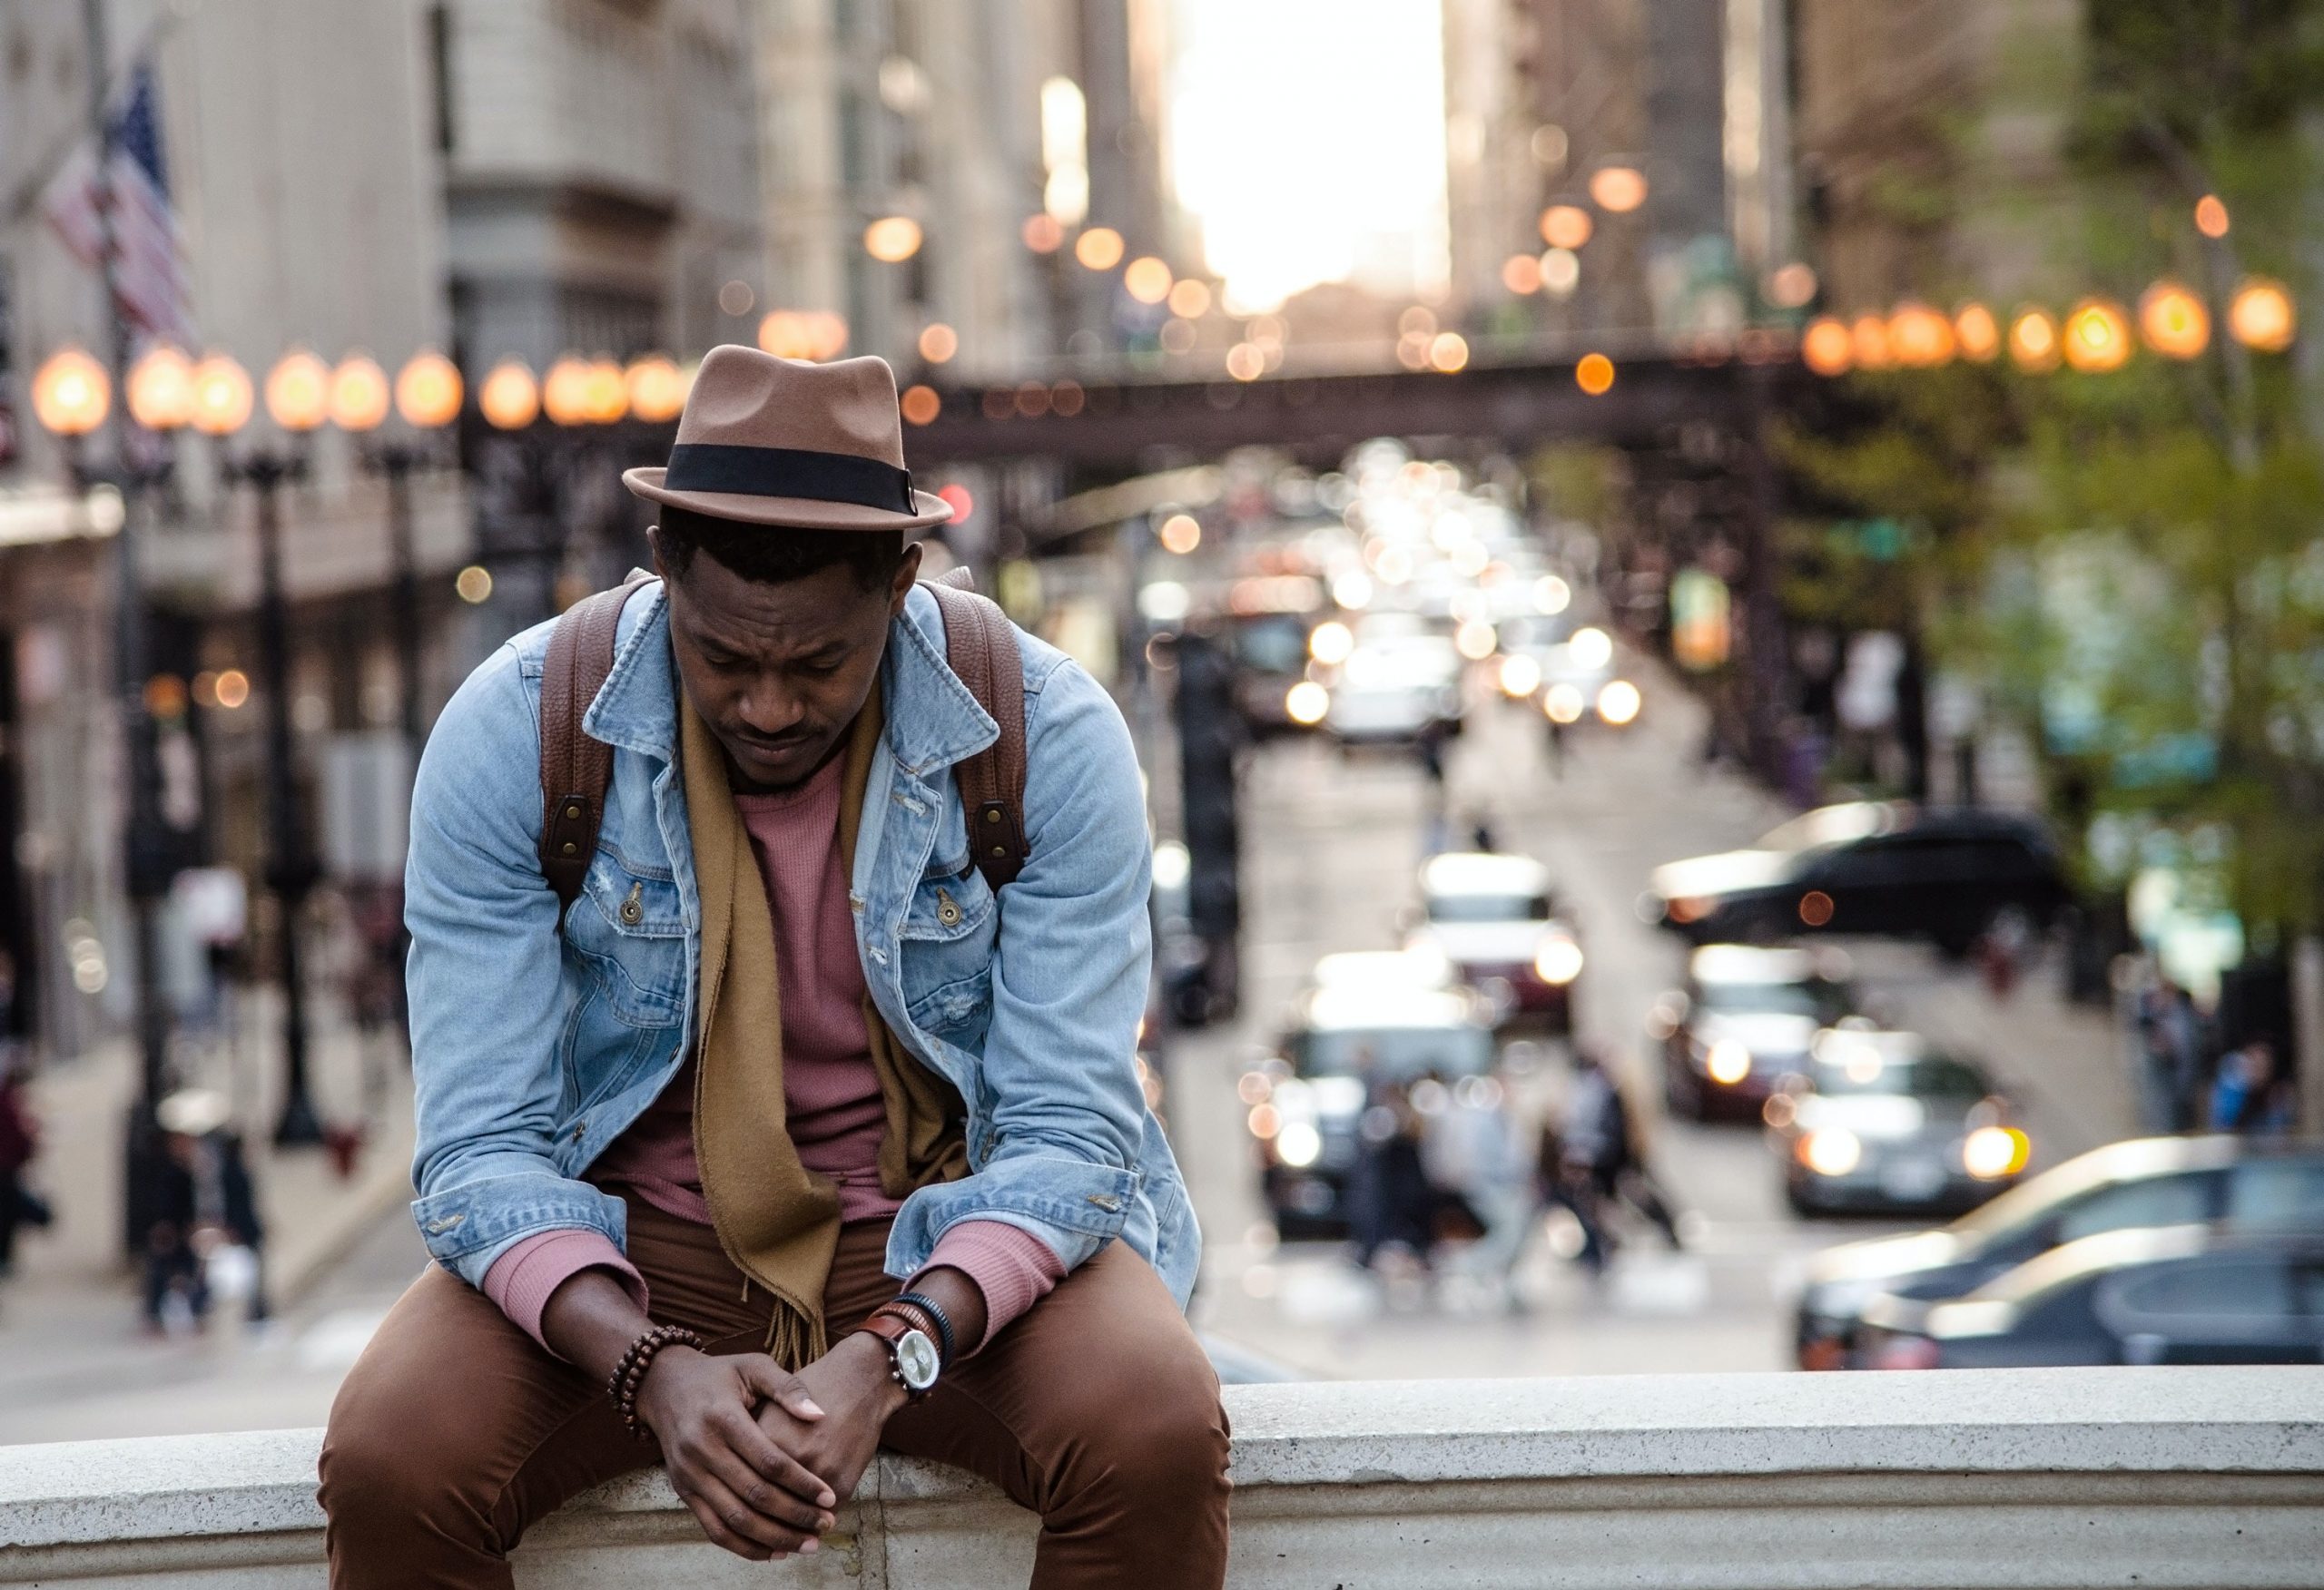 A young Black man sits on a ledge with his hands clasped looking contemplative. He wears a light blue denim jacket and maroon trousers.